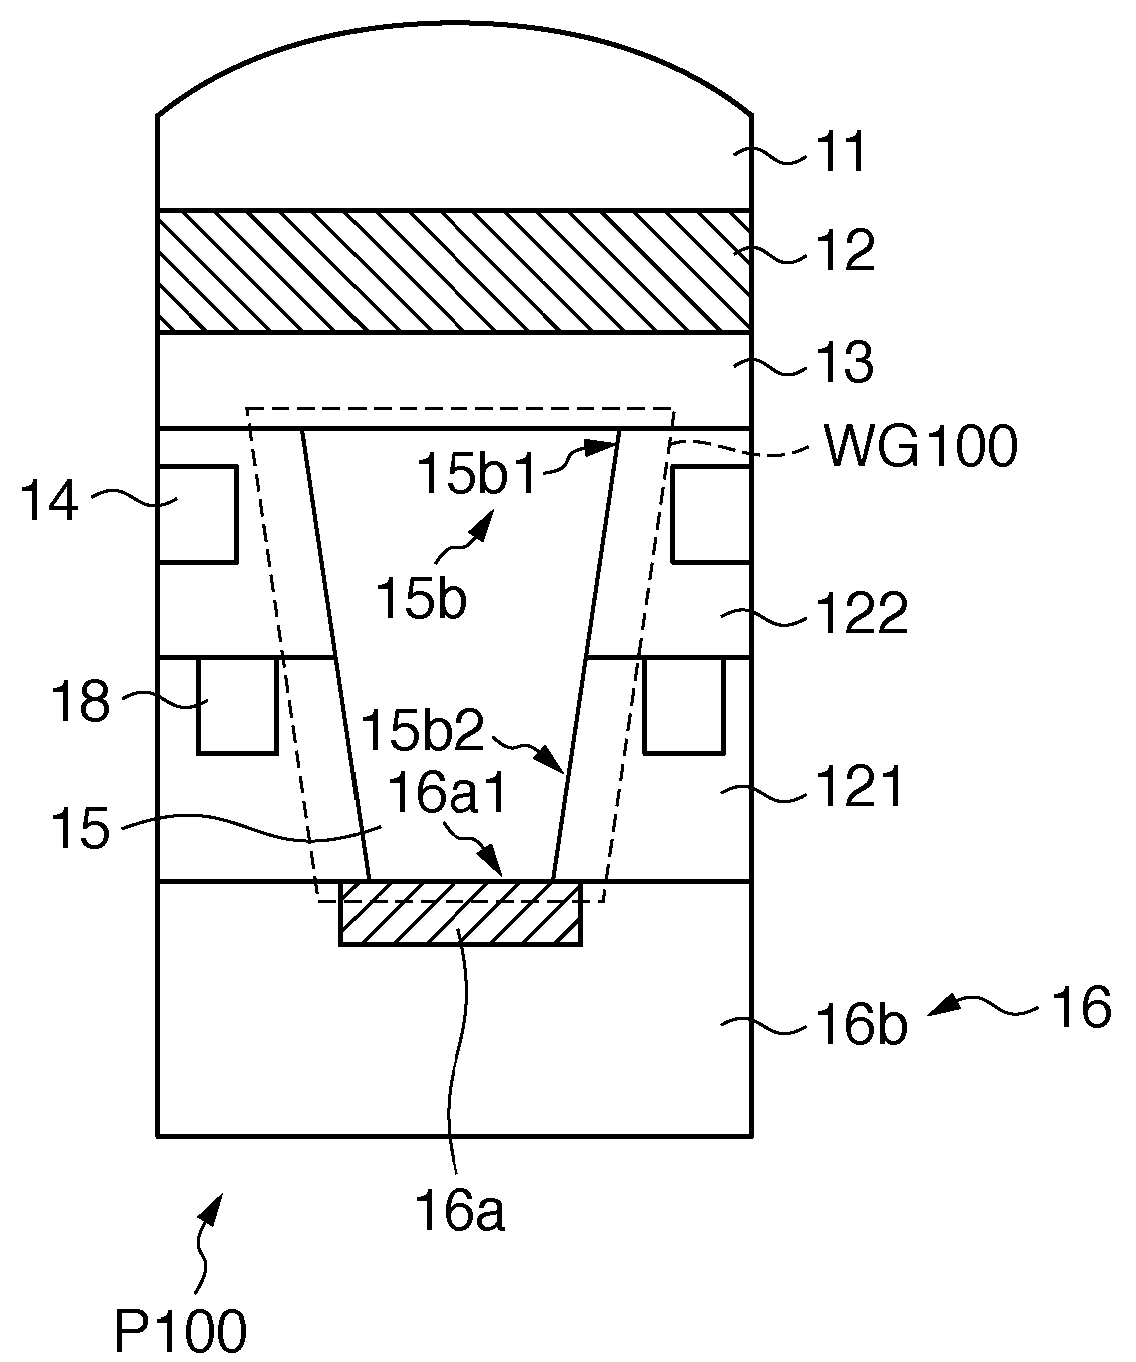 Image sensor comprising a waveguide structure and imaging apparatus